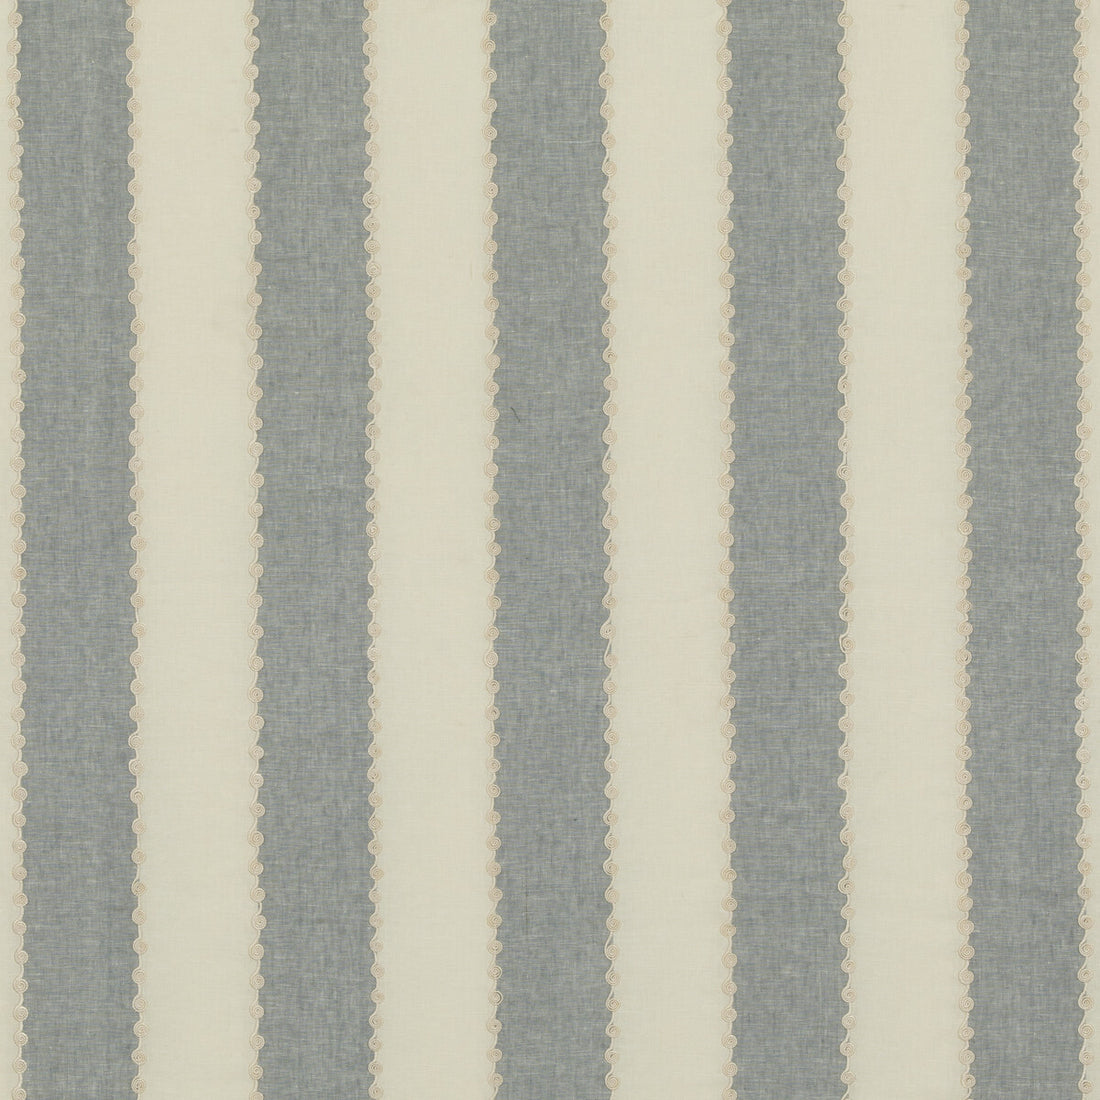 Ashmore Stripe fabric in blue color - pattern BF10944.660.0 - by G P &amp; J Baker in the Ashmore collection